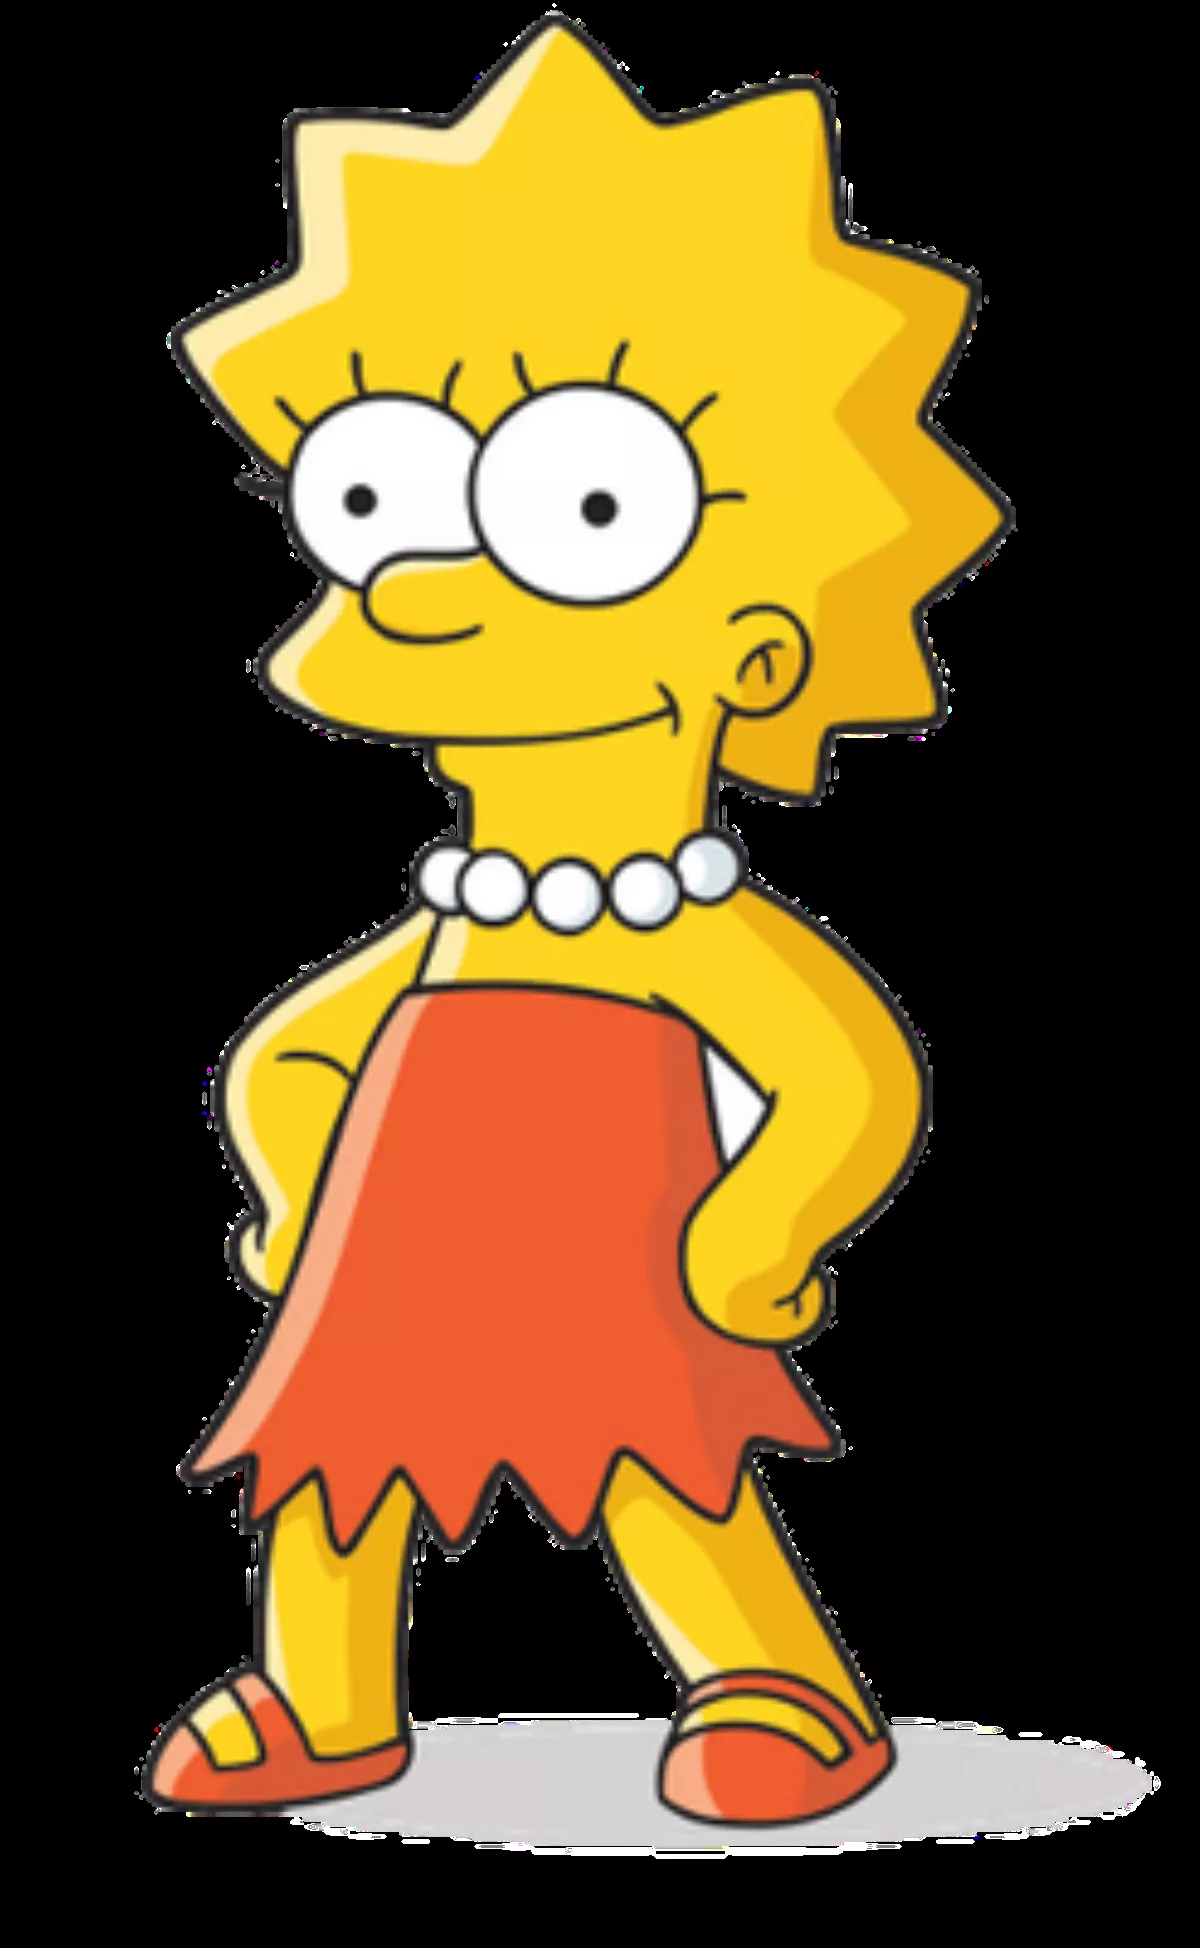 38 Facts About Lisa Simpson | FactSnippet